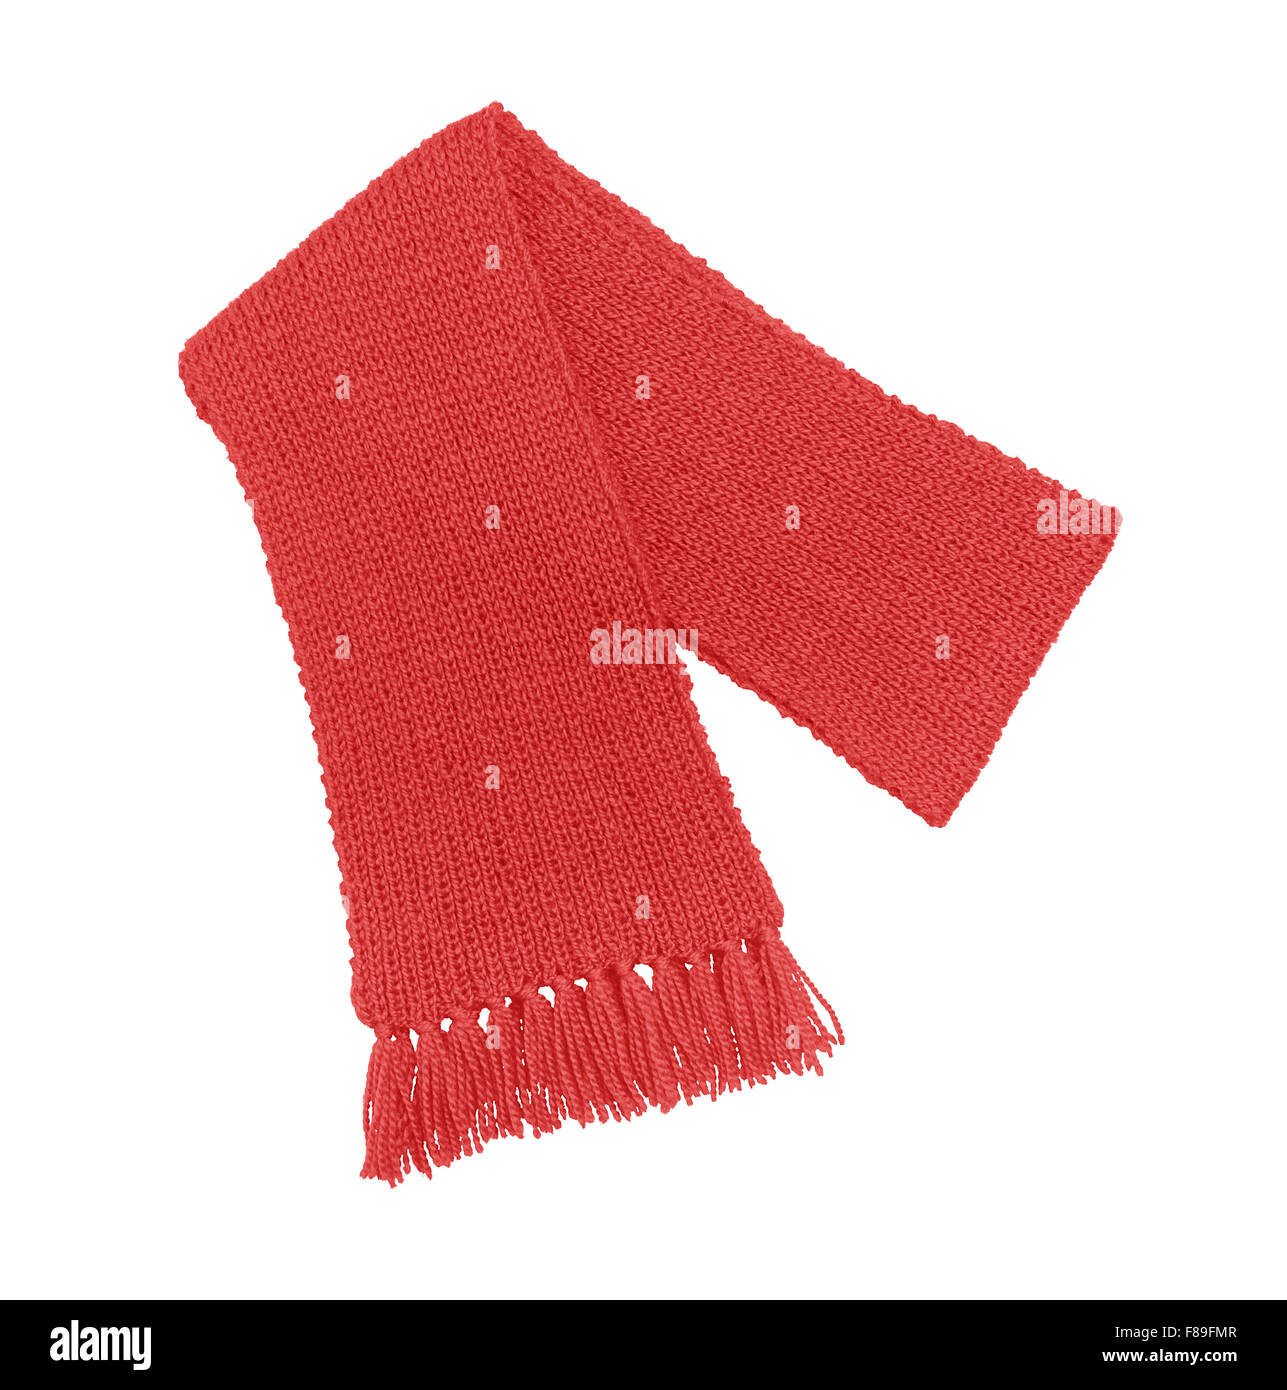 Red knitted scarf isolate. Stock Photo